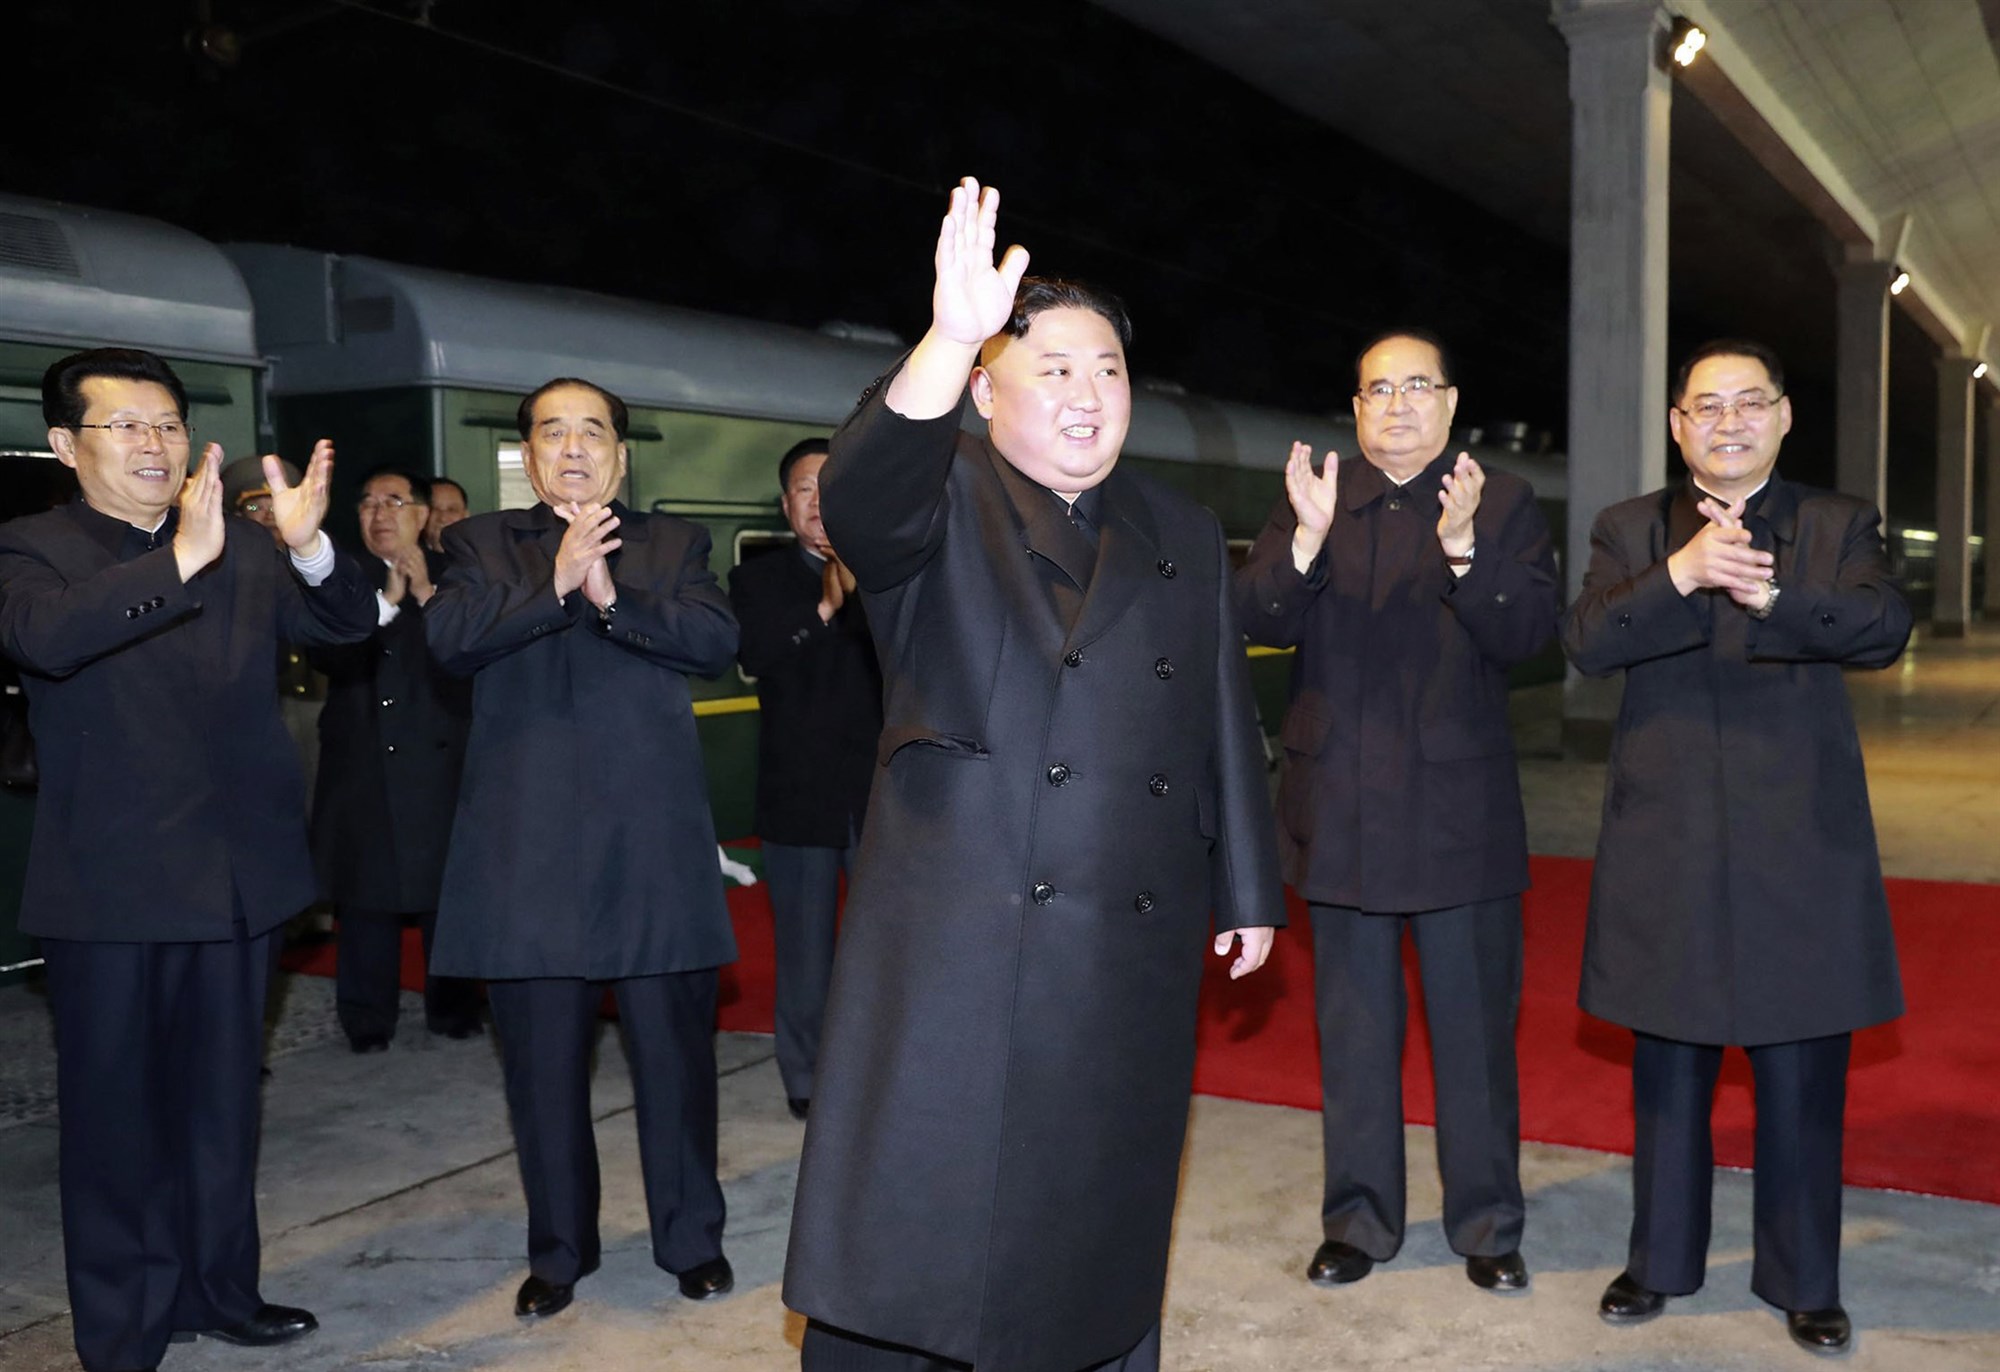 In this photo provided by the North Korean government, North Korean leader Kim Jong Un waves at an undisclosed train station in North Korea on April 24, 2019, before leaving for Russia. / KCNA / Korea News Service via AP